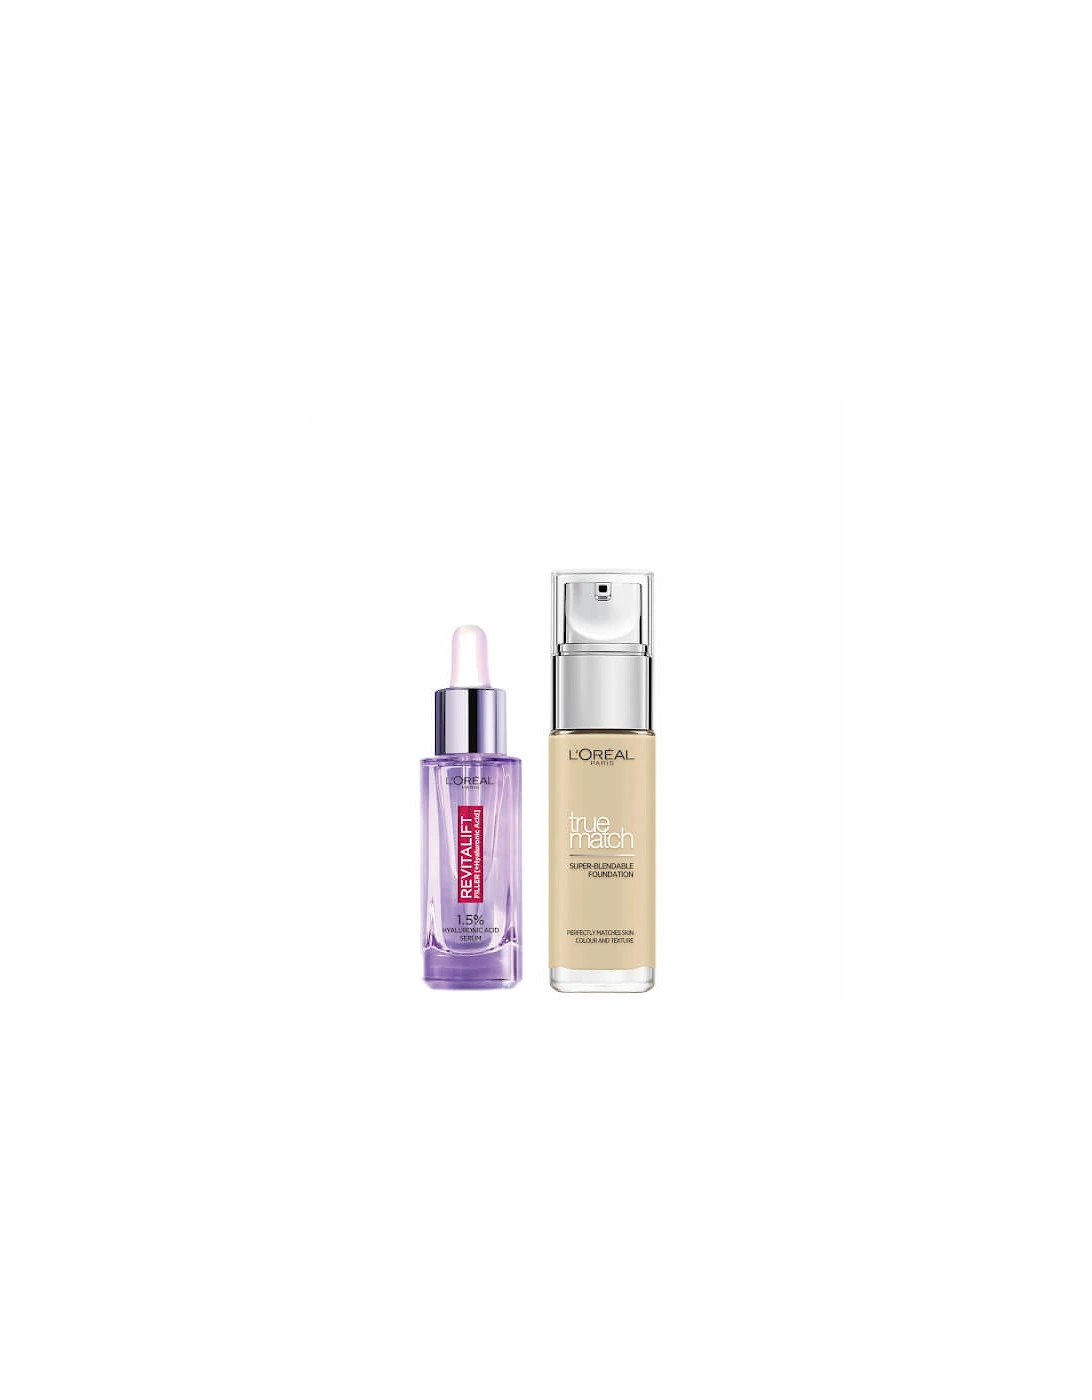 L’Oreal Paris Hyaluronic Acid Filler Serum and True Match Hyaluronic Acid Foundation Duo - 1W Golden Ivory, 2 of 1